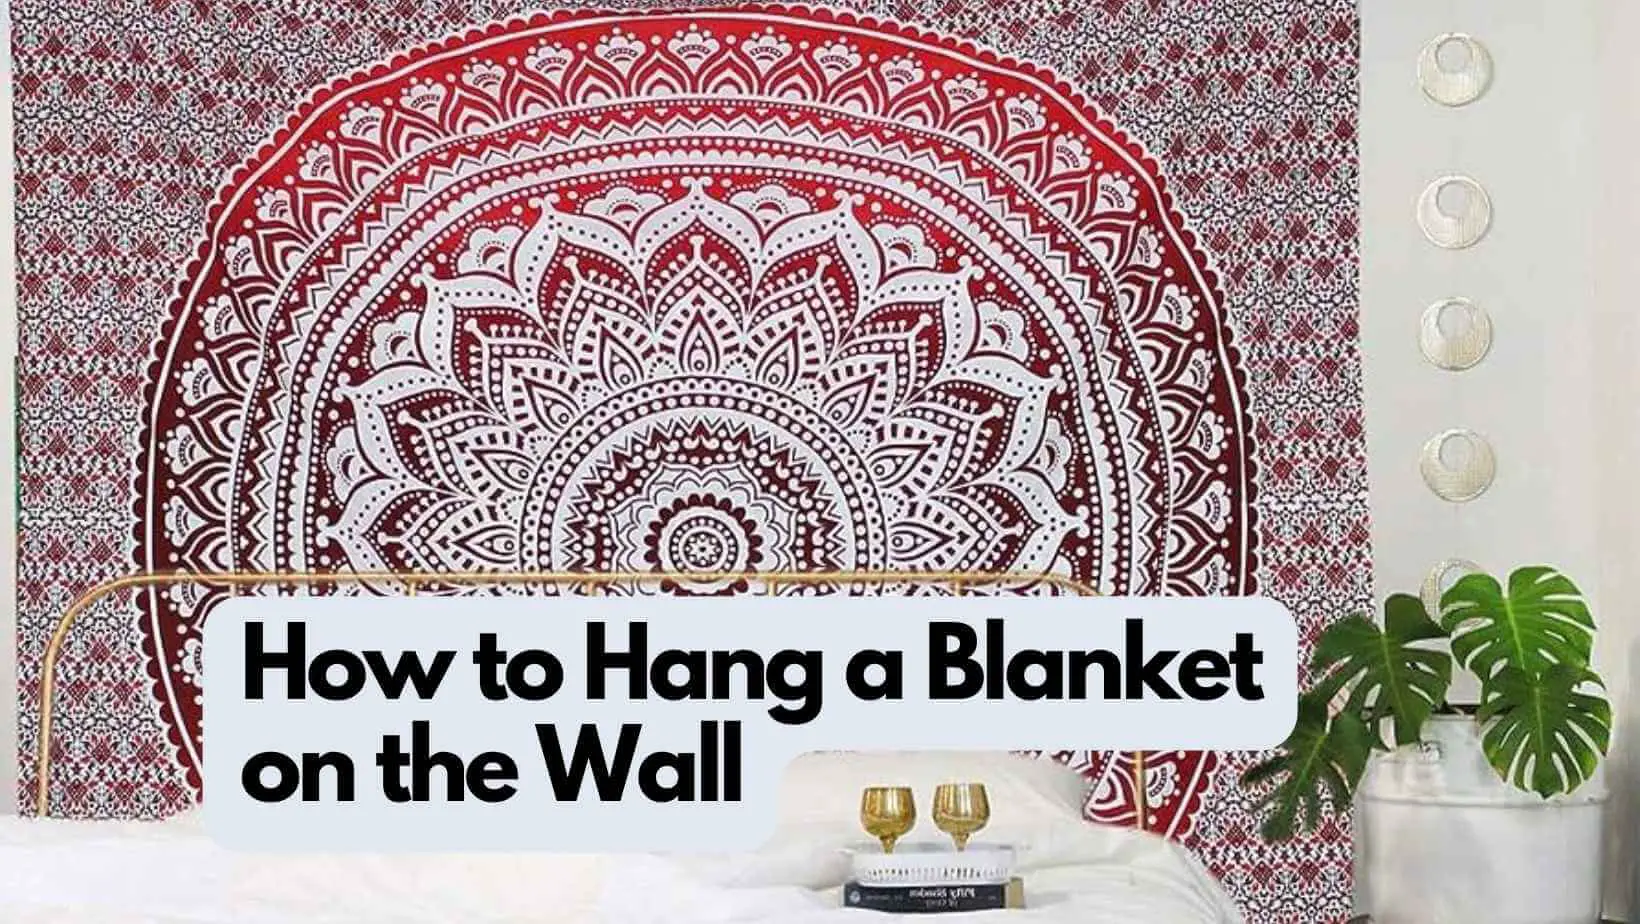 How to Hang a Blanket on the Wall